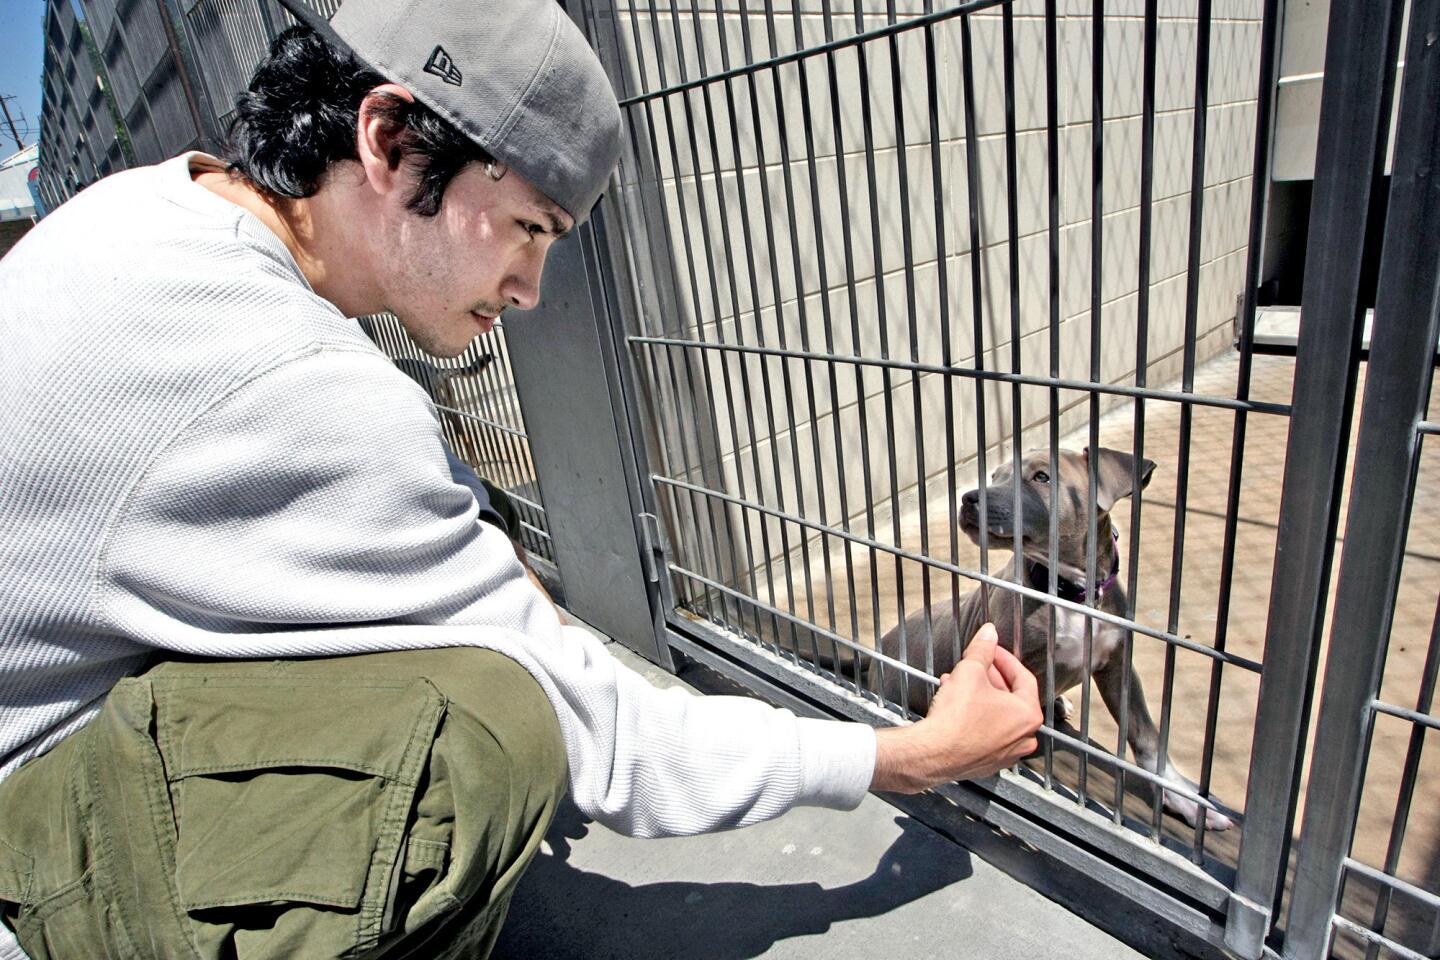 Hersson Mayolga talks to a puppy at the Burbank Animal Shelter on Tuesday, August 11, 2014. The shelter will join nearly 50 animal shelters across Southern California participating in "Clear the Shelters," a daylong adoption event. On Aug. 15, the adoption fee for all dogs and cats will be reduced to $20, and the shelter will hold extended adoption hours from 9 a.m. to 6 p.m.